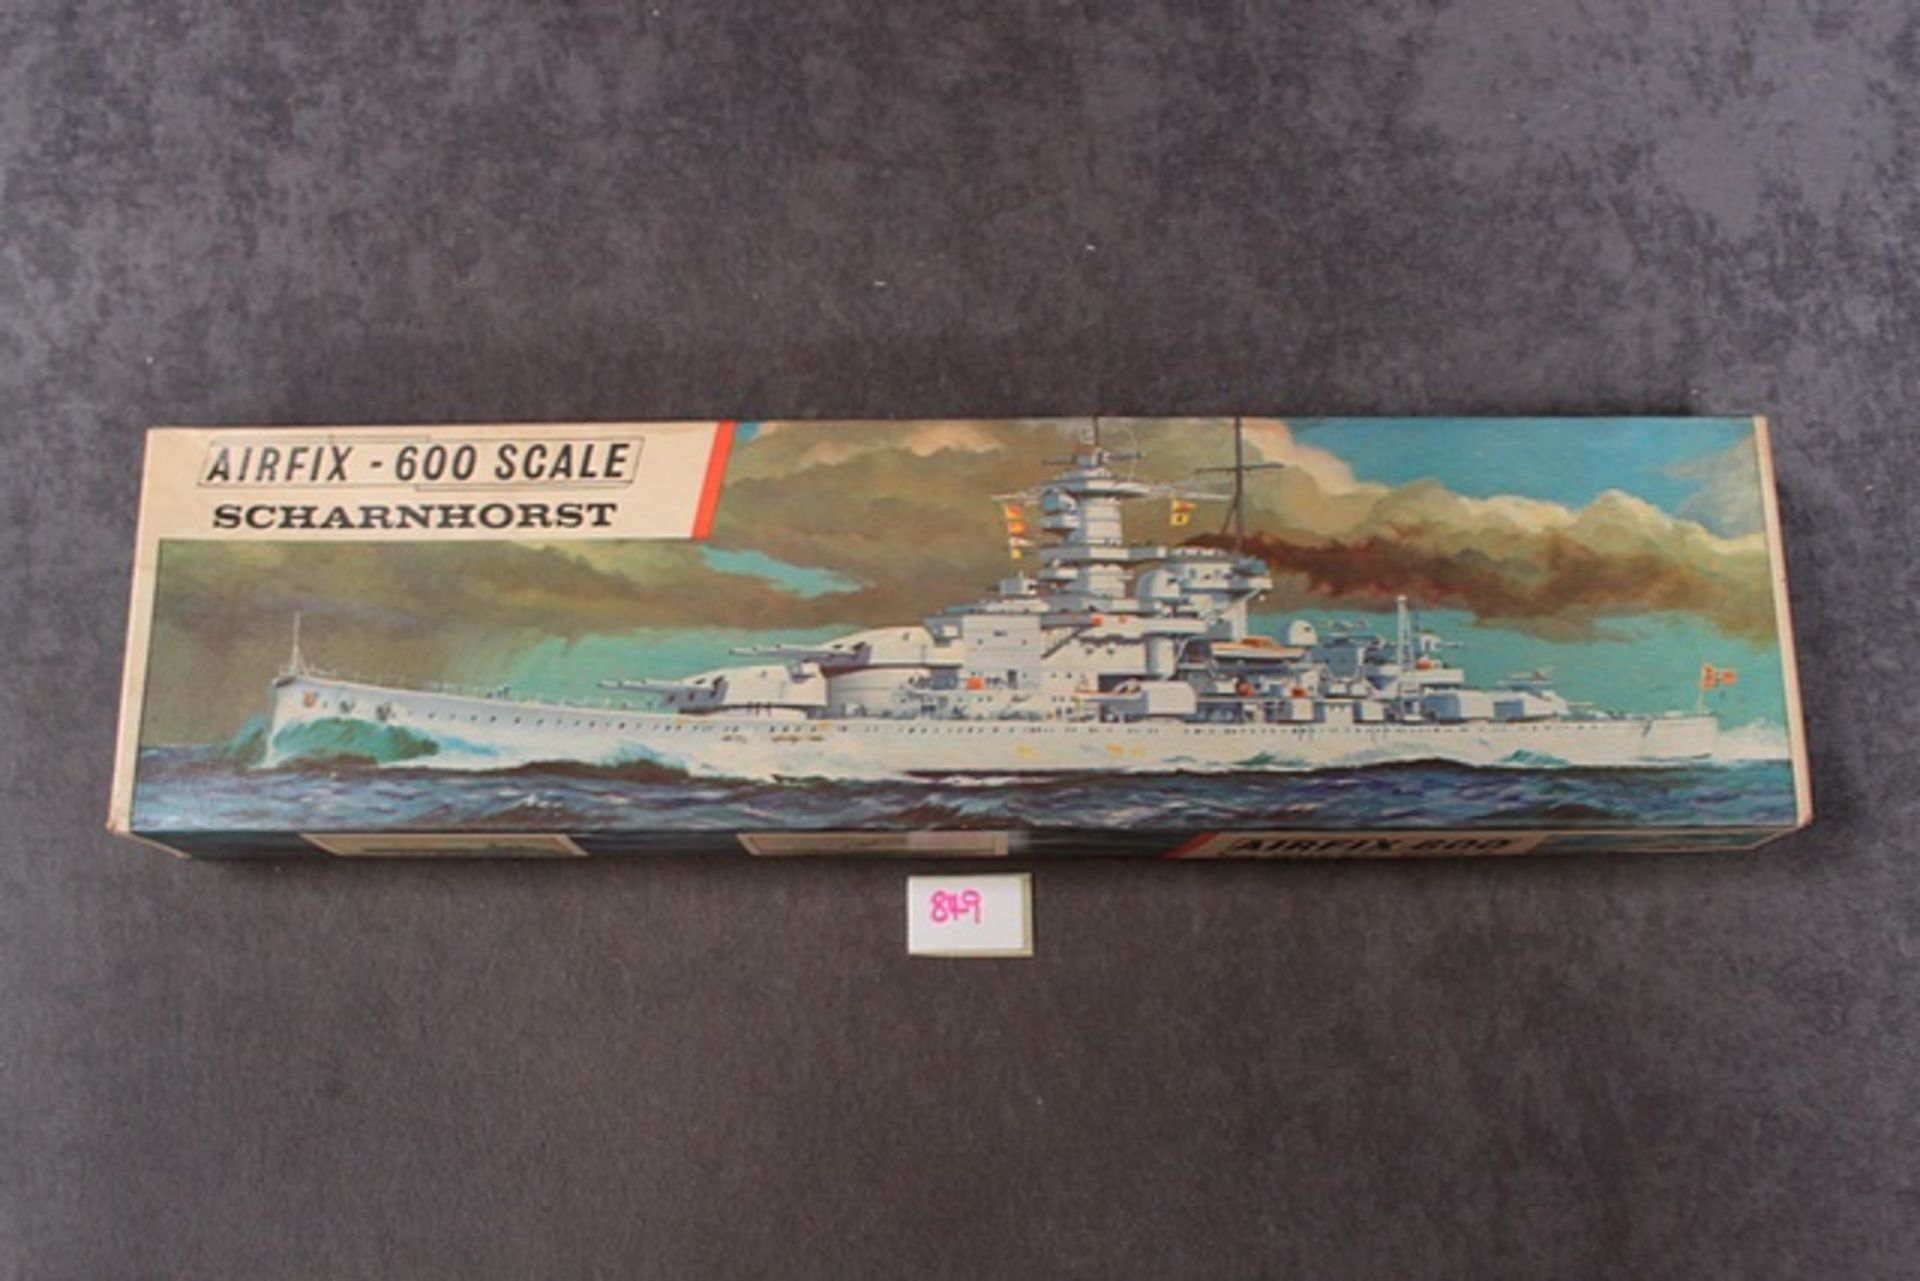 Airfix 600 Construction Kit Scale Series 4 No F406S Scharnhorst On Sprues With Instruction - Image 2 of 2